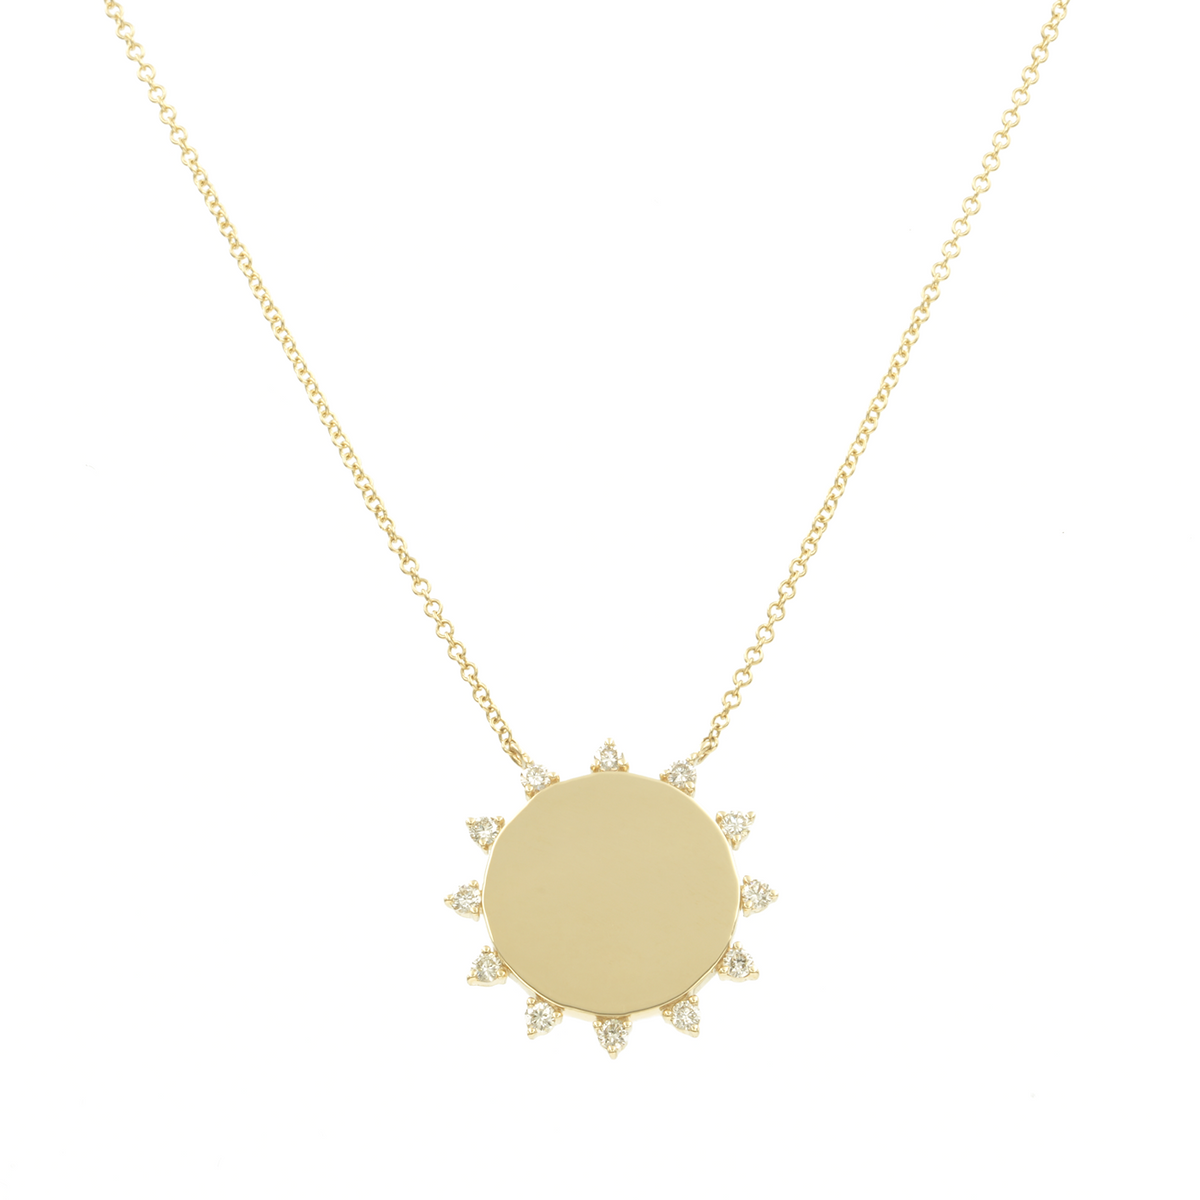 Solid Gold Disc Necklace with Diamond